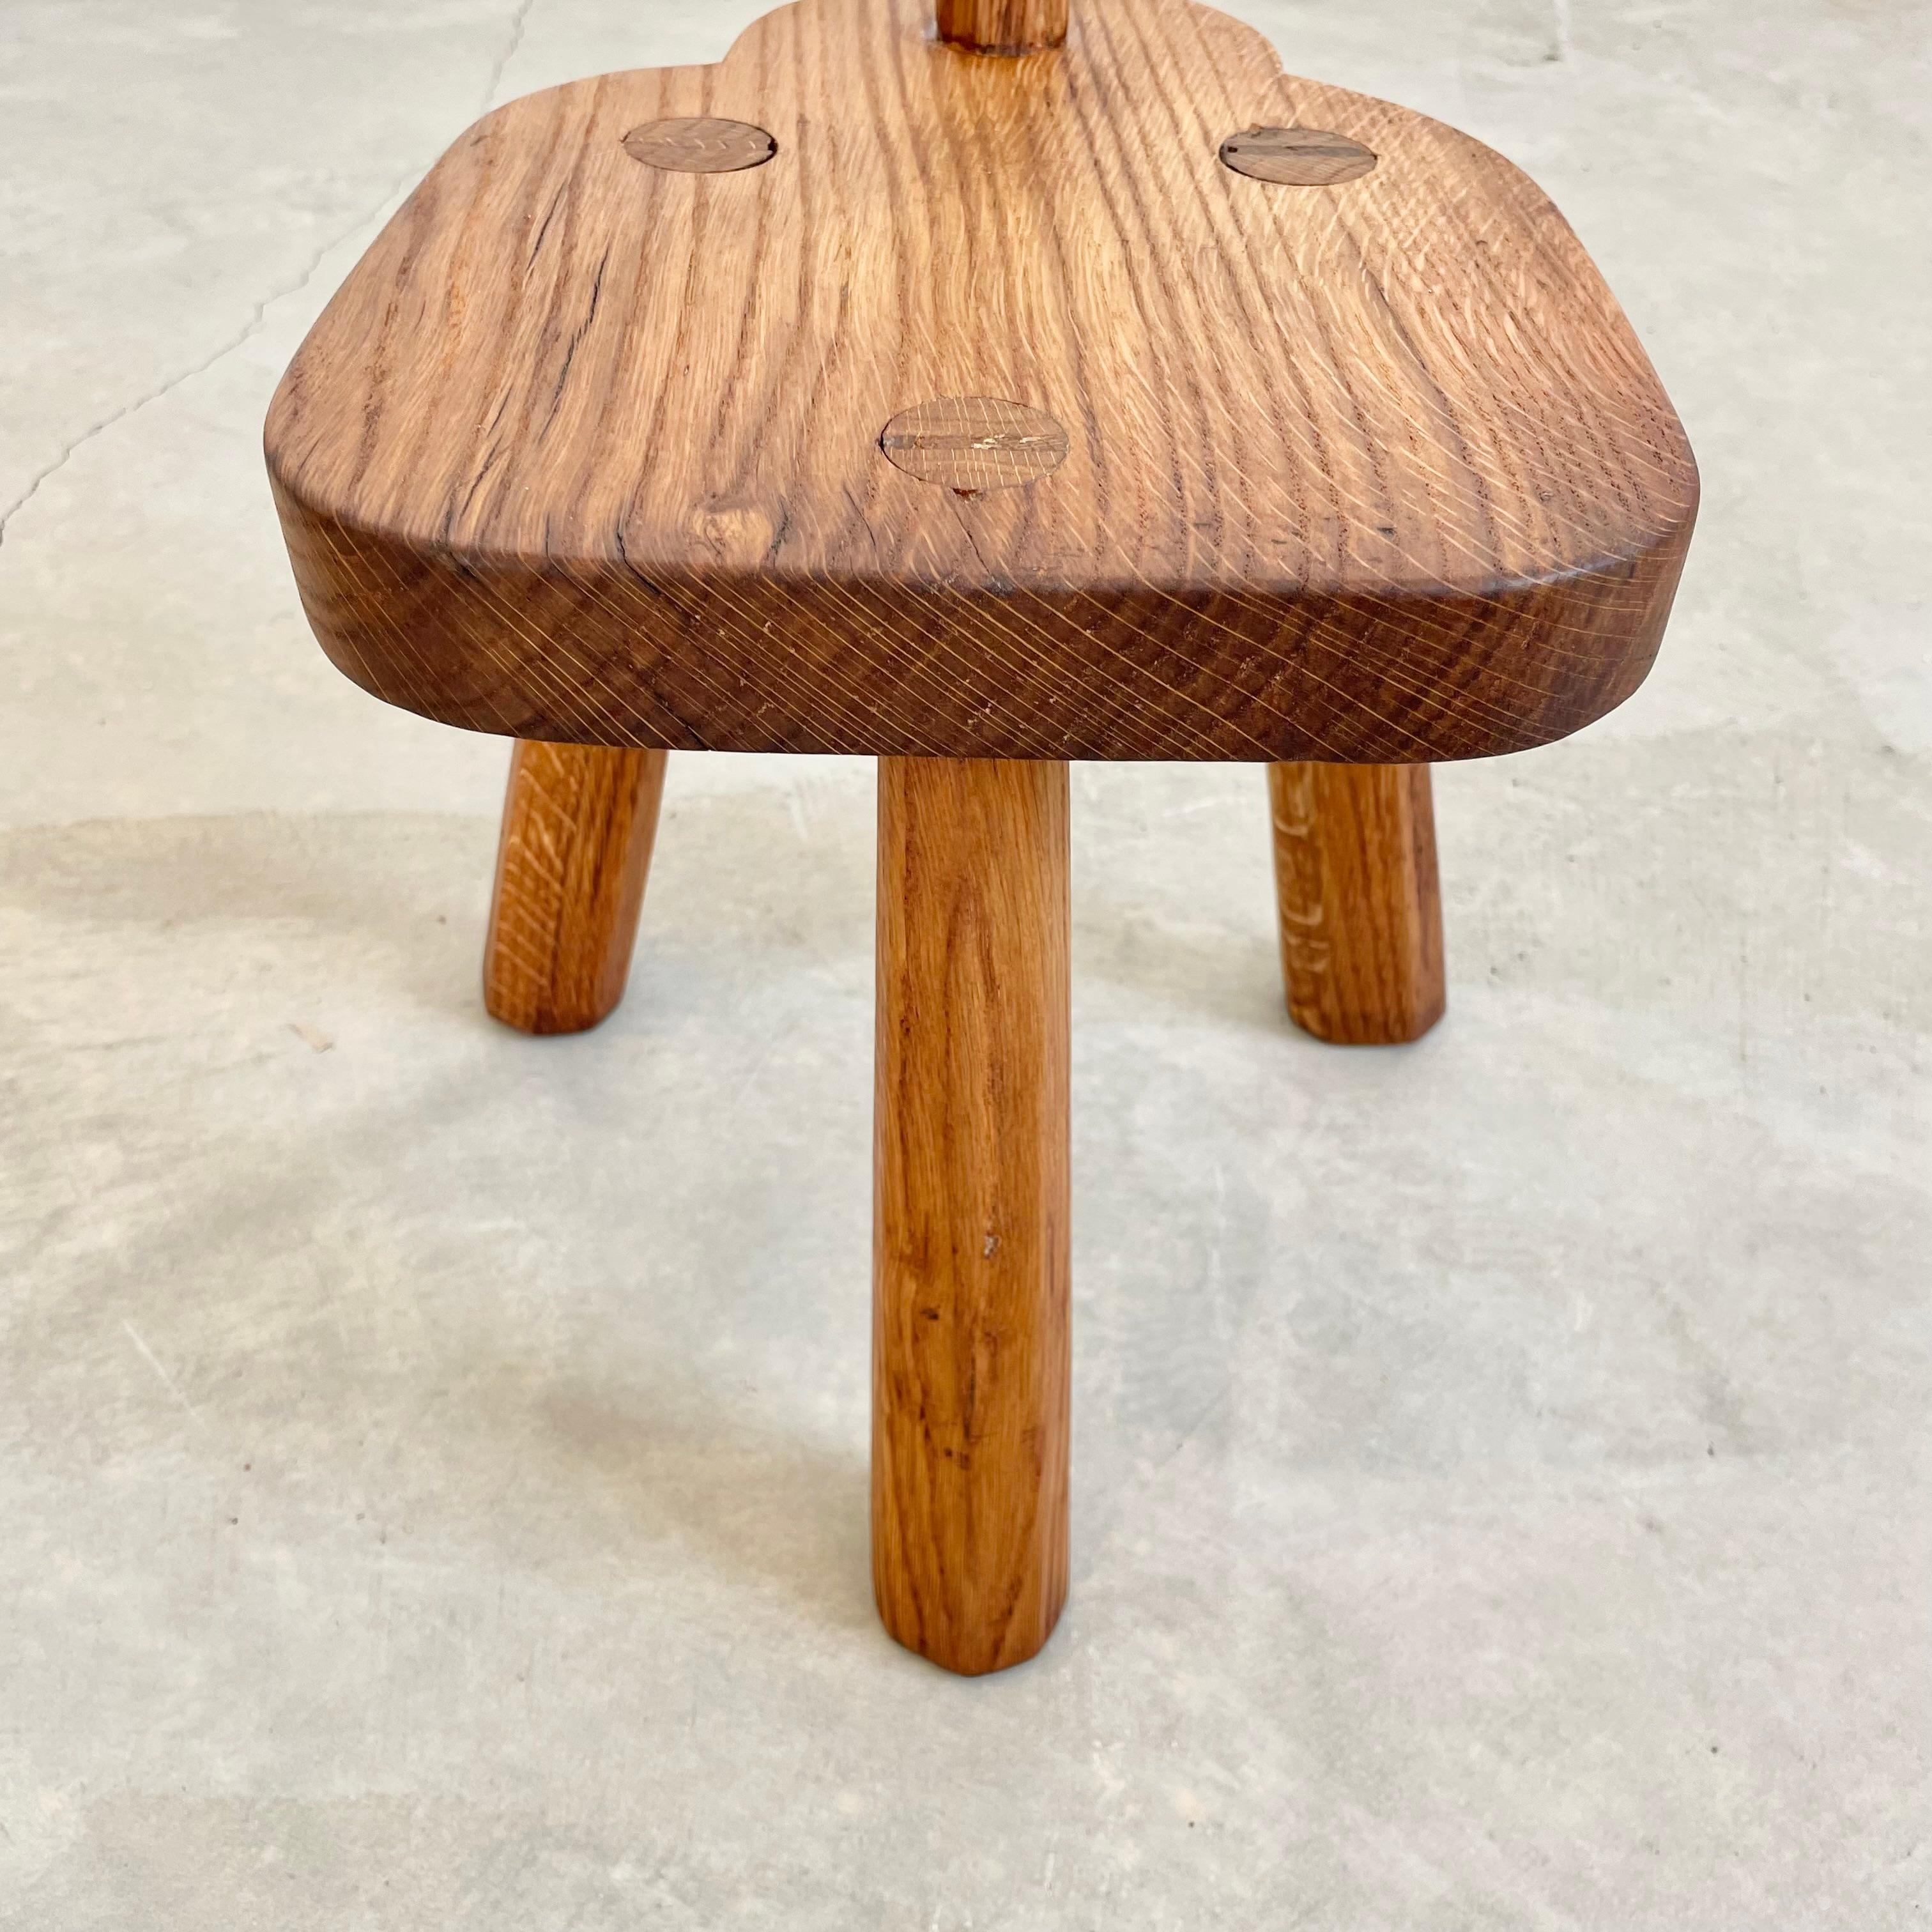 Wood Tripod Stool with Backrest, 1960s France For Sale 1